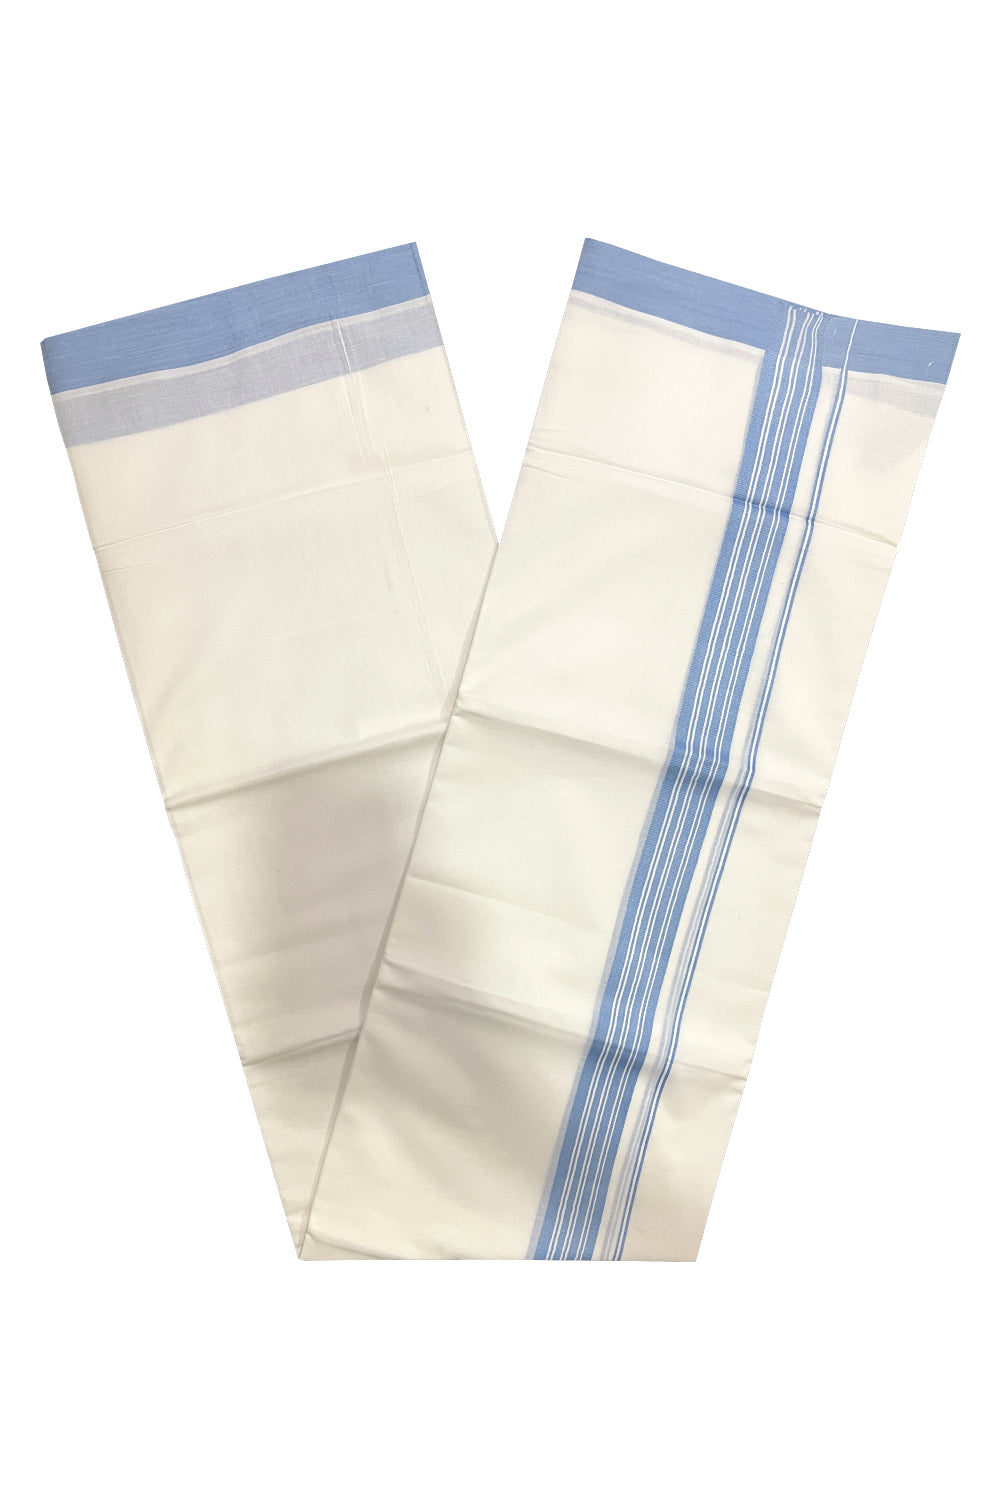 Pure White Cotton Double Mundu with Blue Lines Border (South Indian Kerala Dhoti)